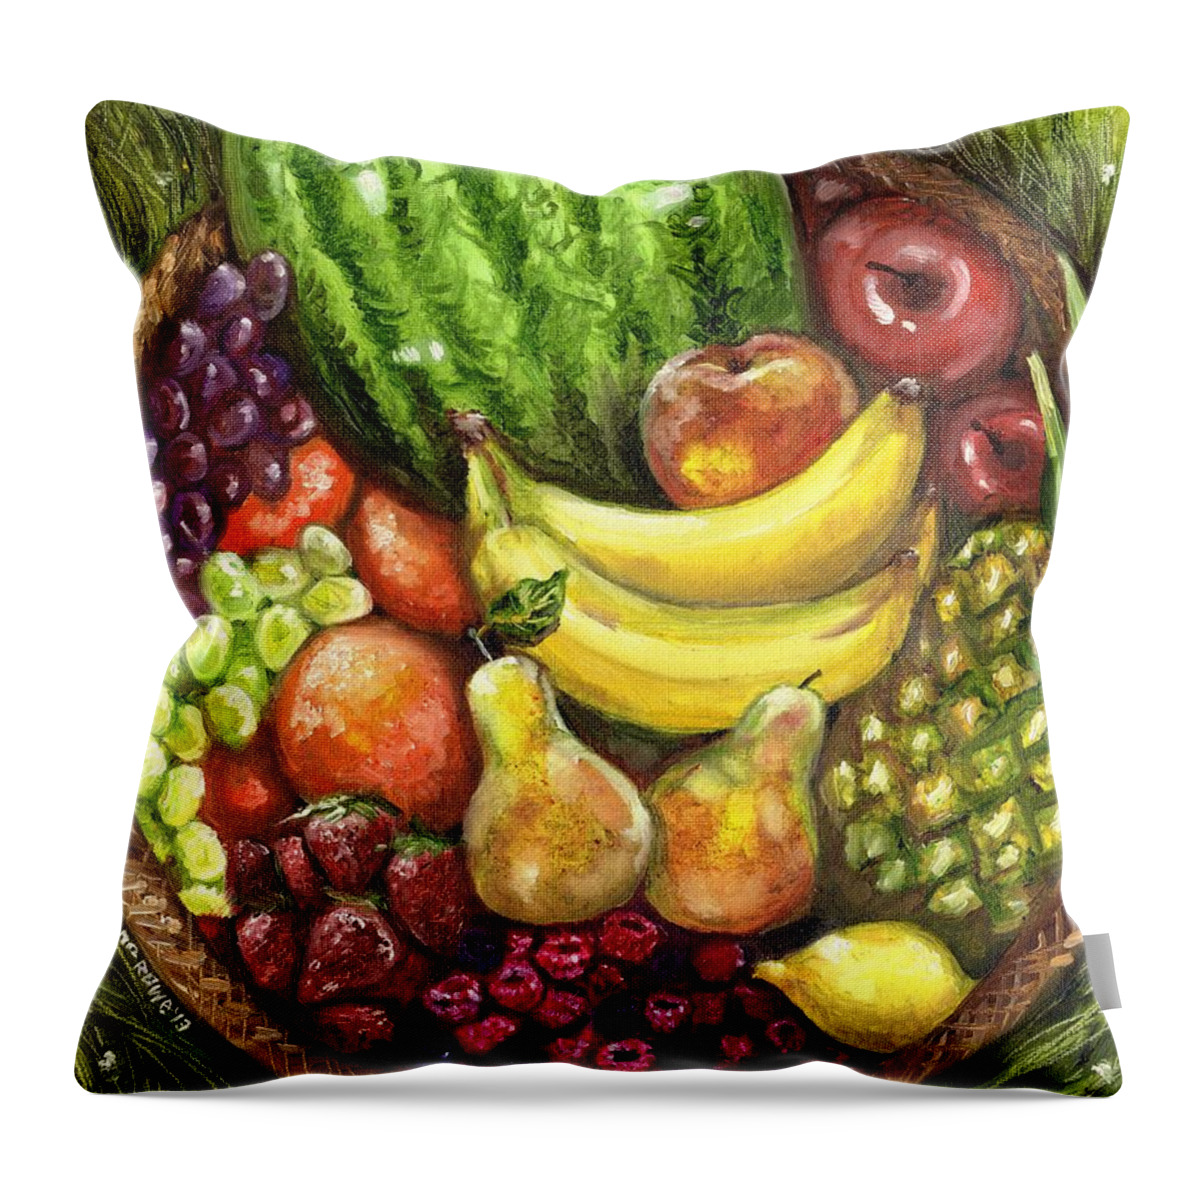 Fruit Throw Pillow featuring the painting Fruit Basket by Shana Rowe Jackson